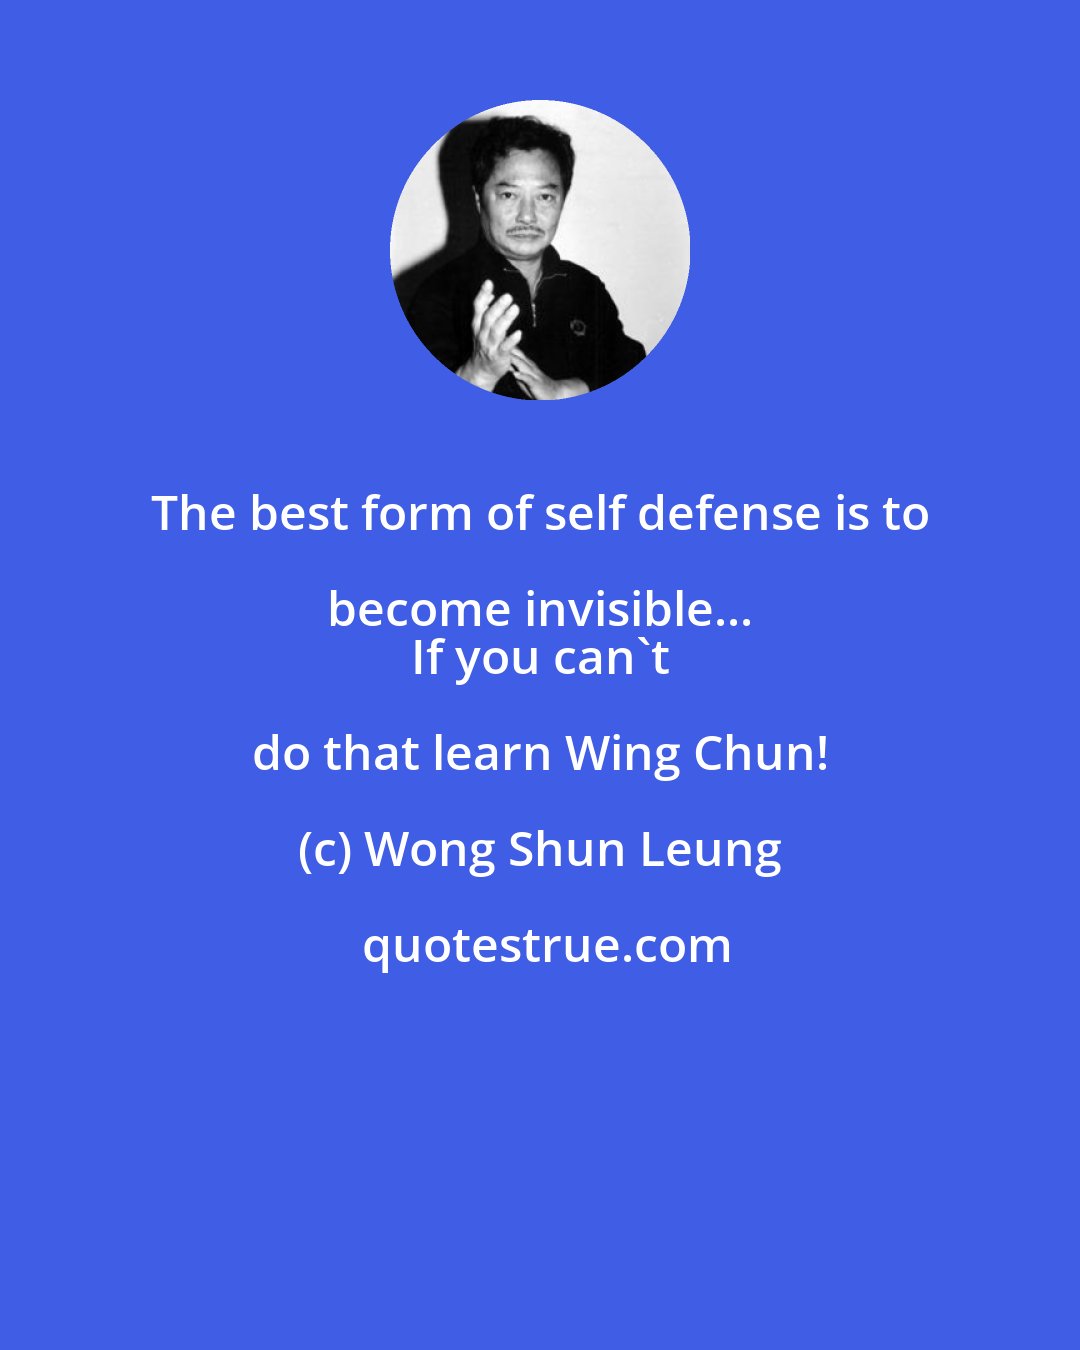 Wong Shun Leung: The best form of self defense is to become invisible... 
 If you can't do that learn Wing Chun!